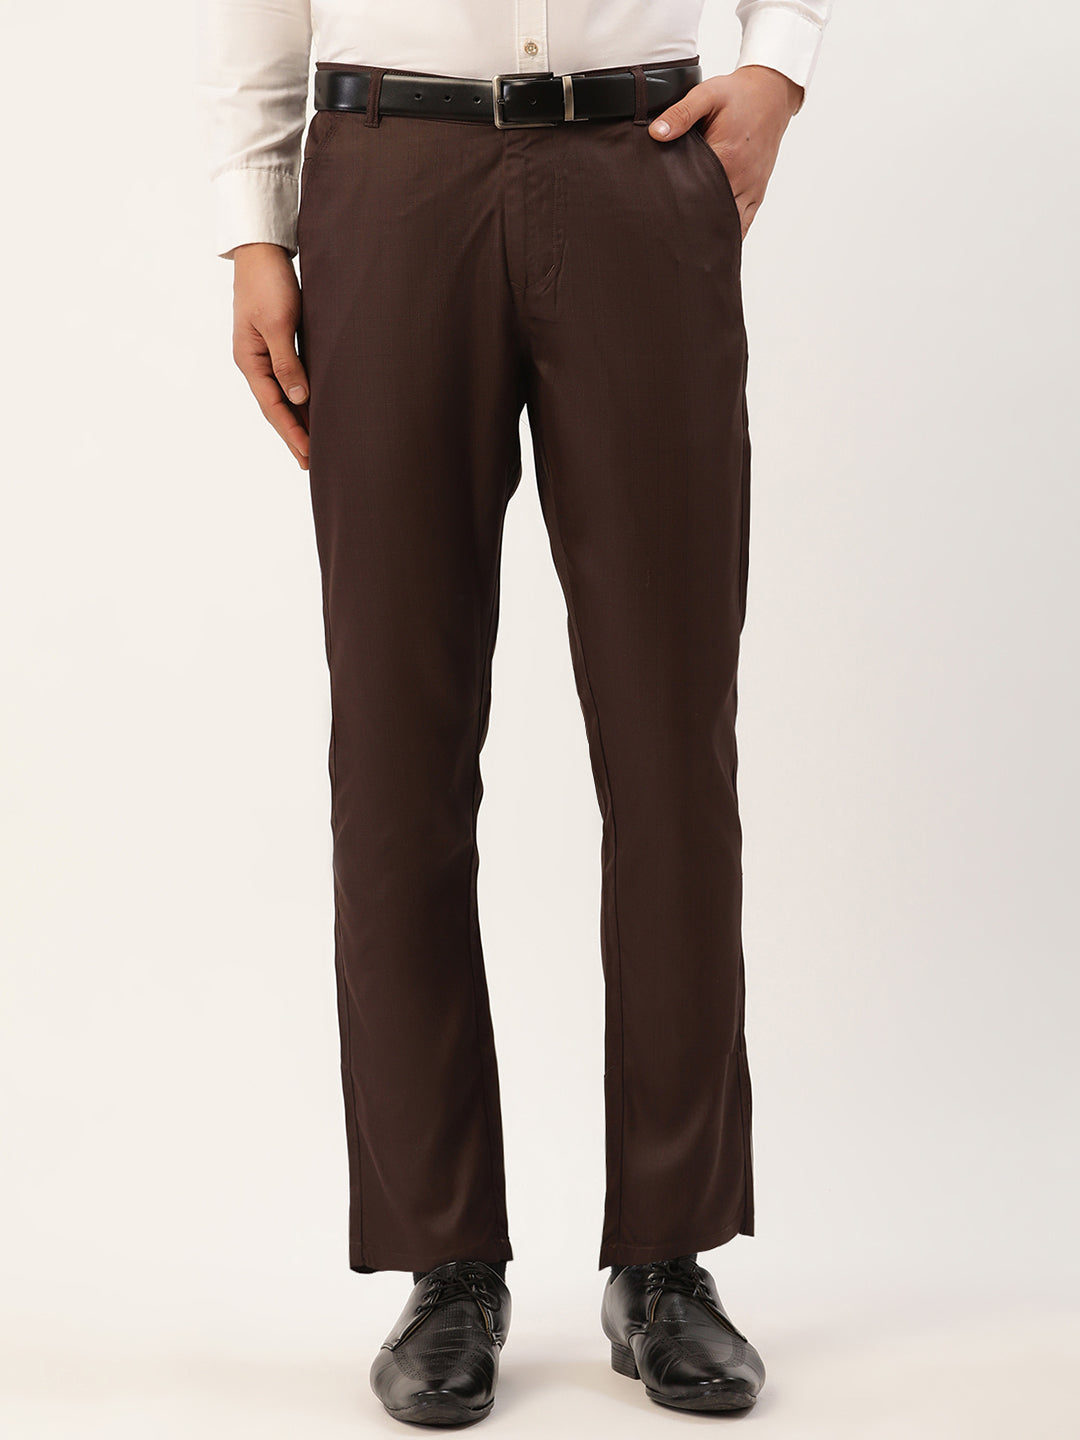 Jainish Men's Coffee Checked Formal Trousers